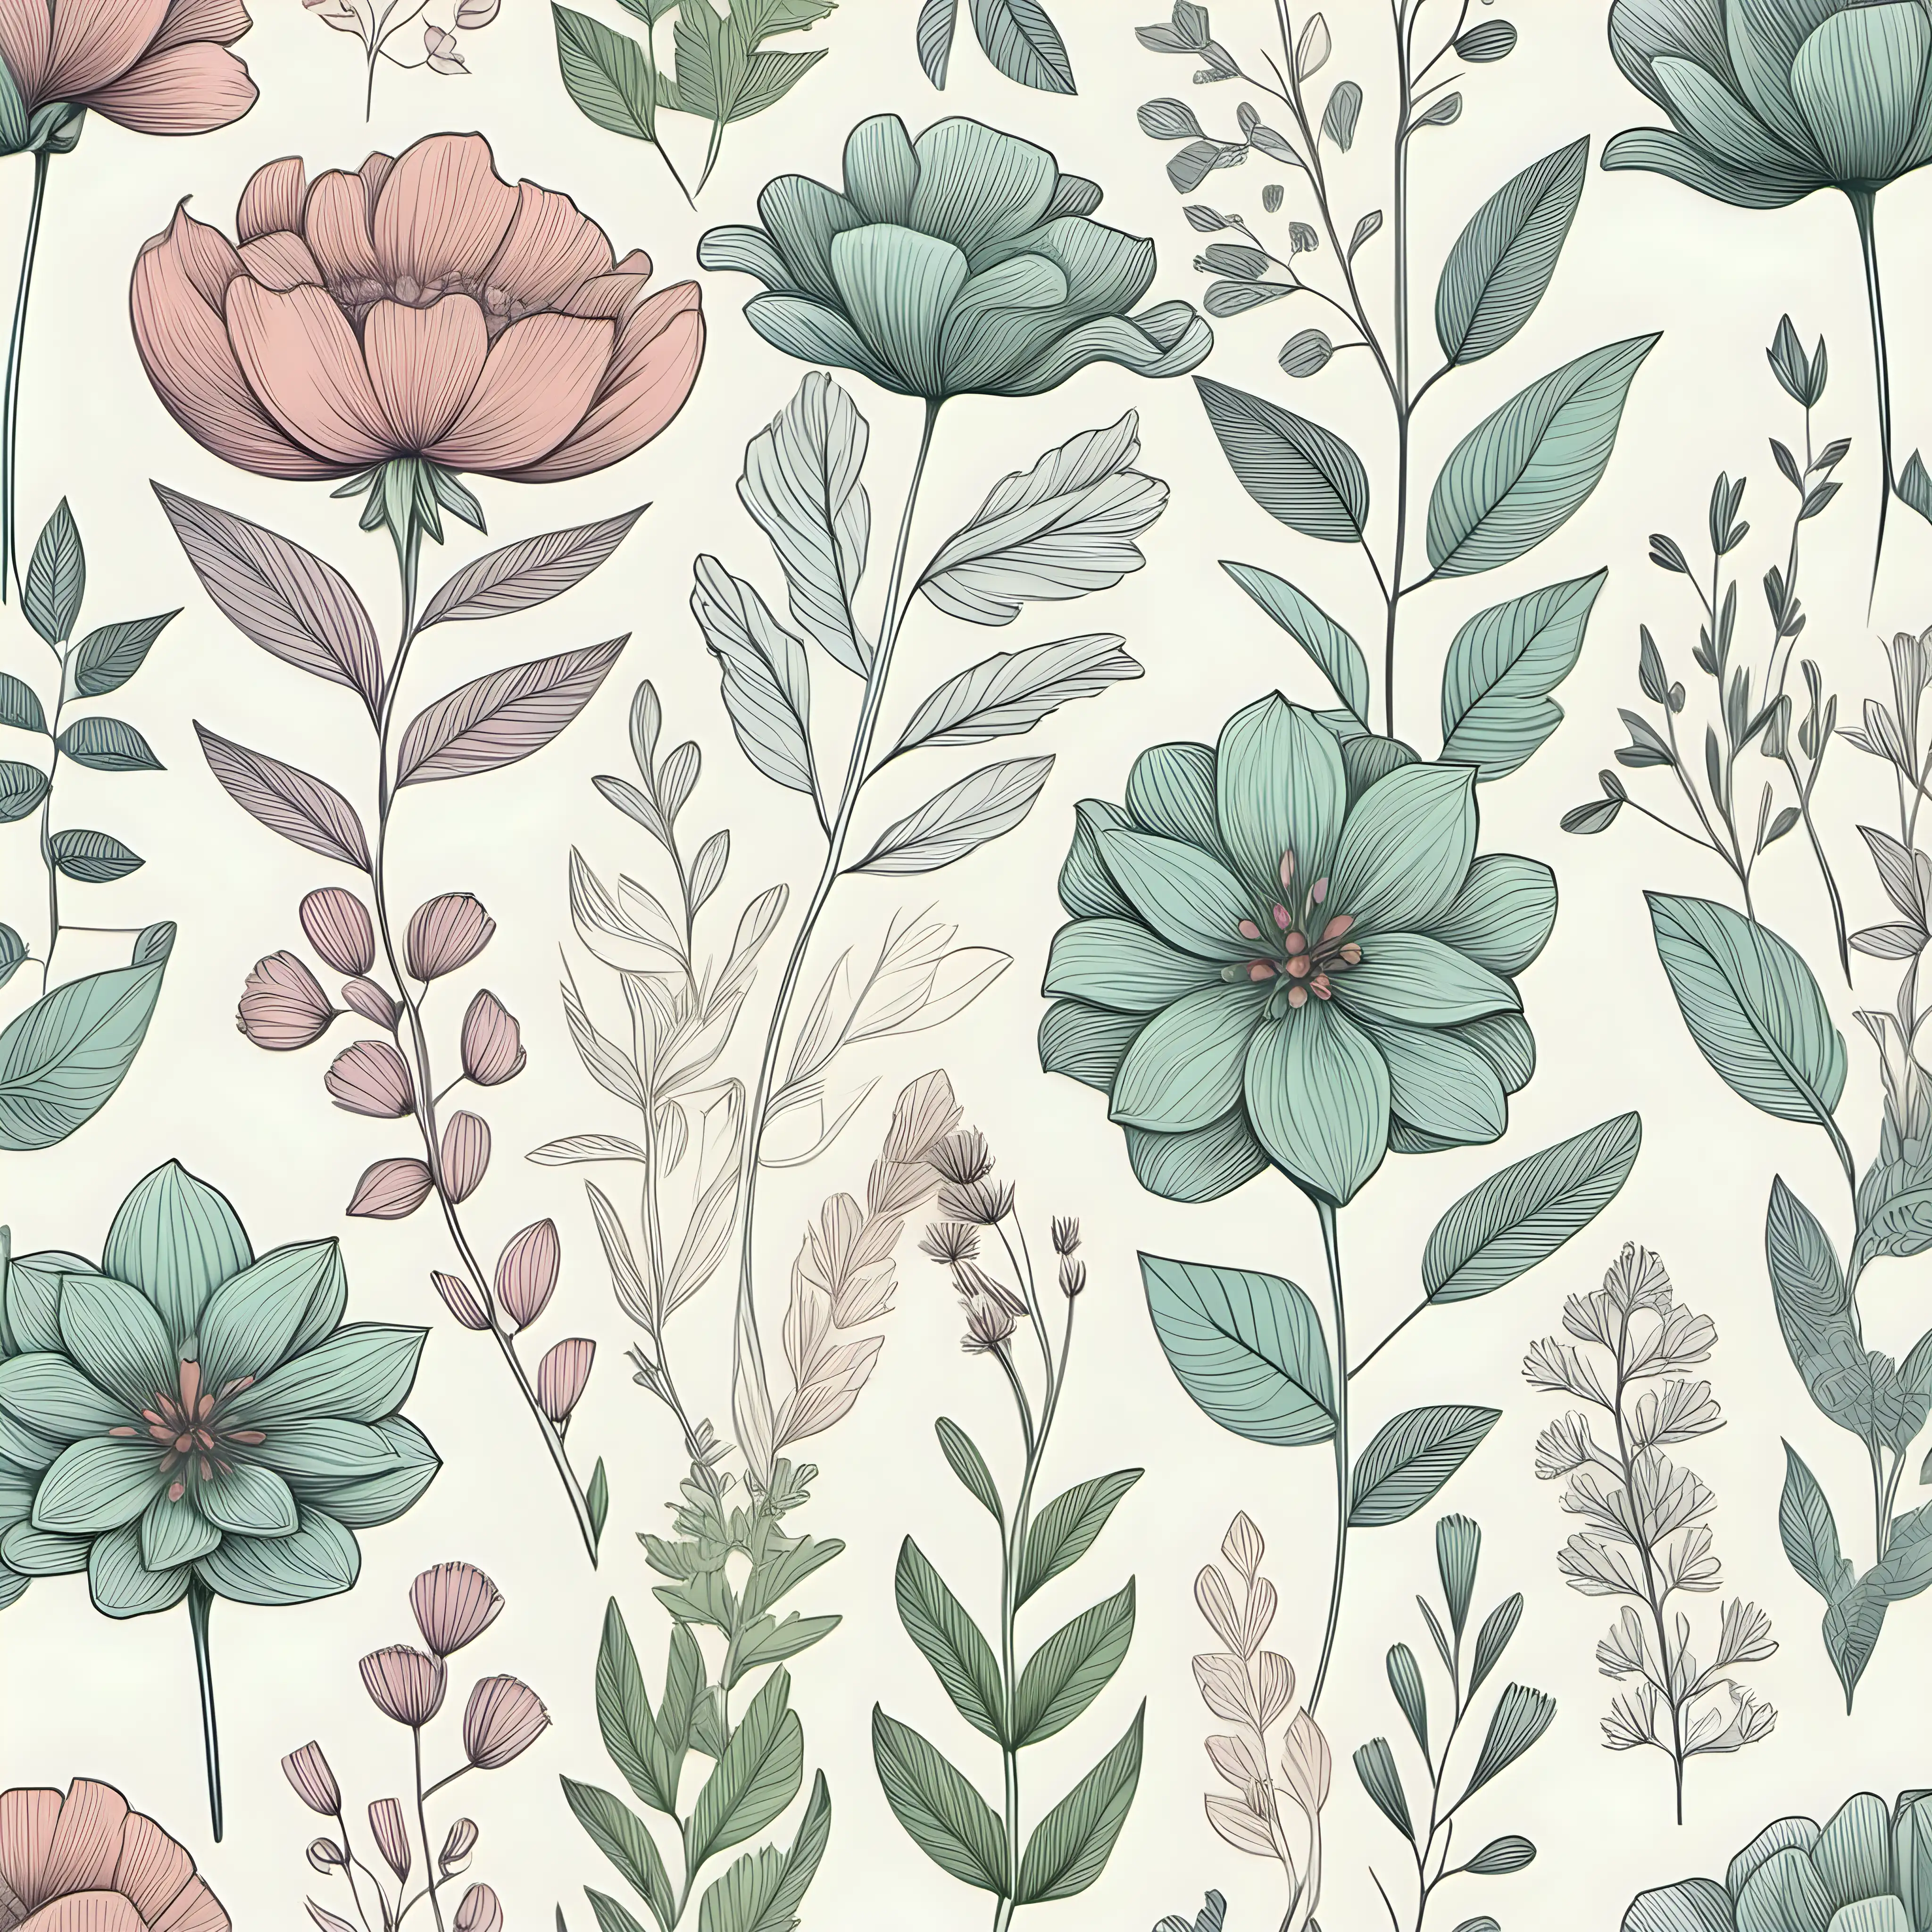 Create an intricate and visually appealing print pattern inspired by the delightful fragrances of natural elements. Utilize pastel colors and incorporate aesthetic illustrations that capture the essence of nature's beauty. Consider incorporating elements such as blooming flowers, fresh herbs, and serene landscapes to evoke a sense of tranquility. Ensure the pattern seamlessly repeats, making it suitable for various print applications